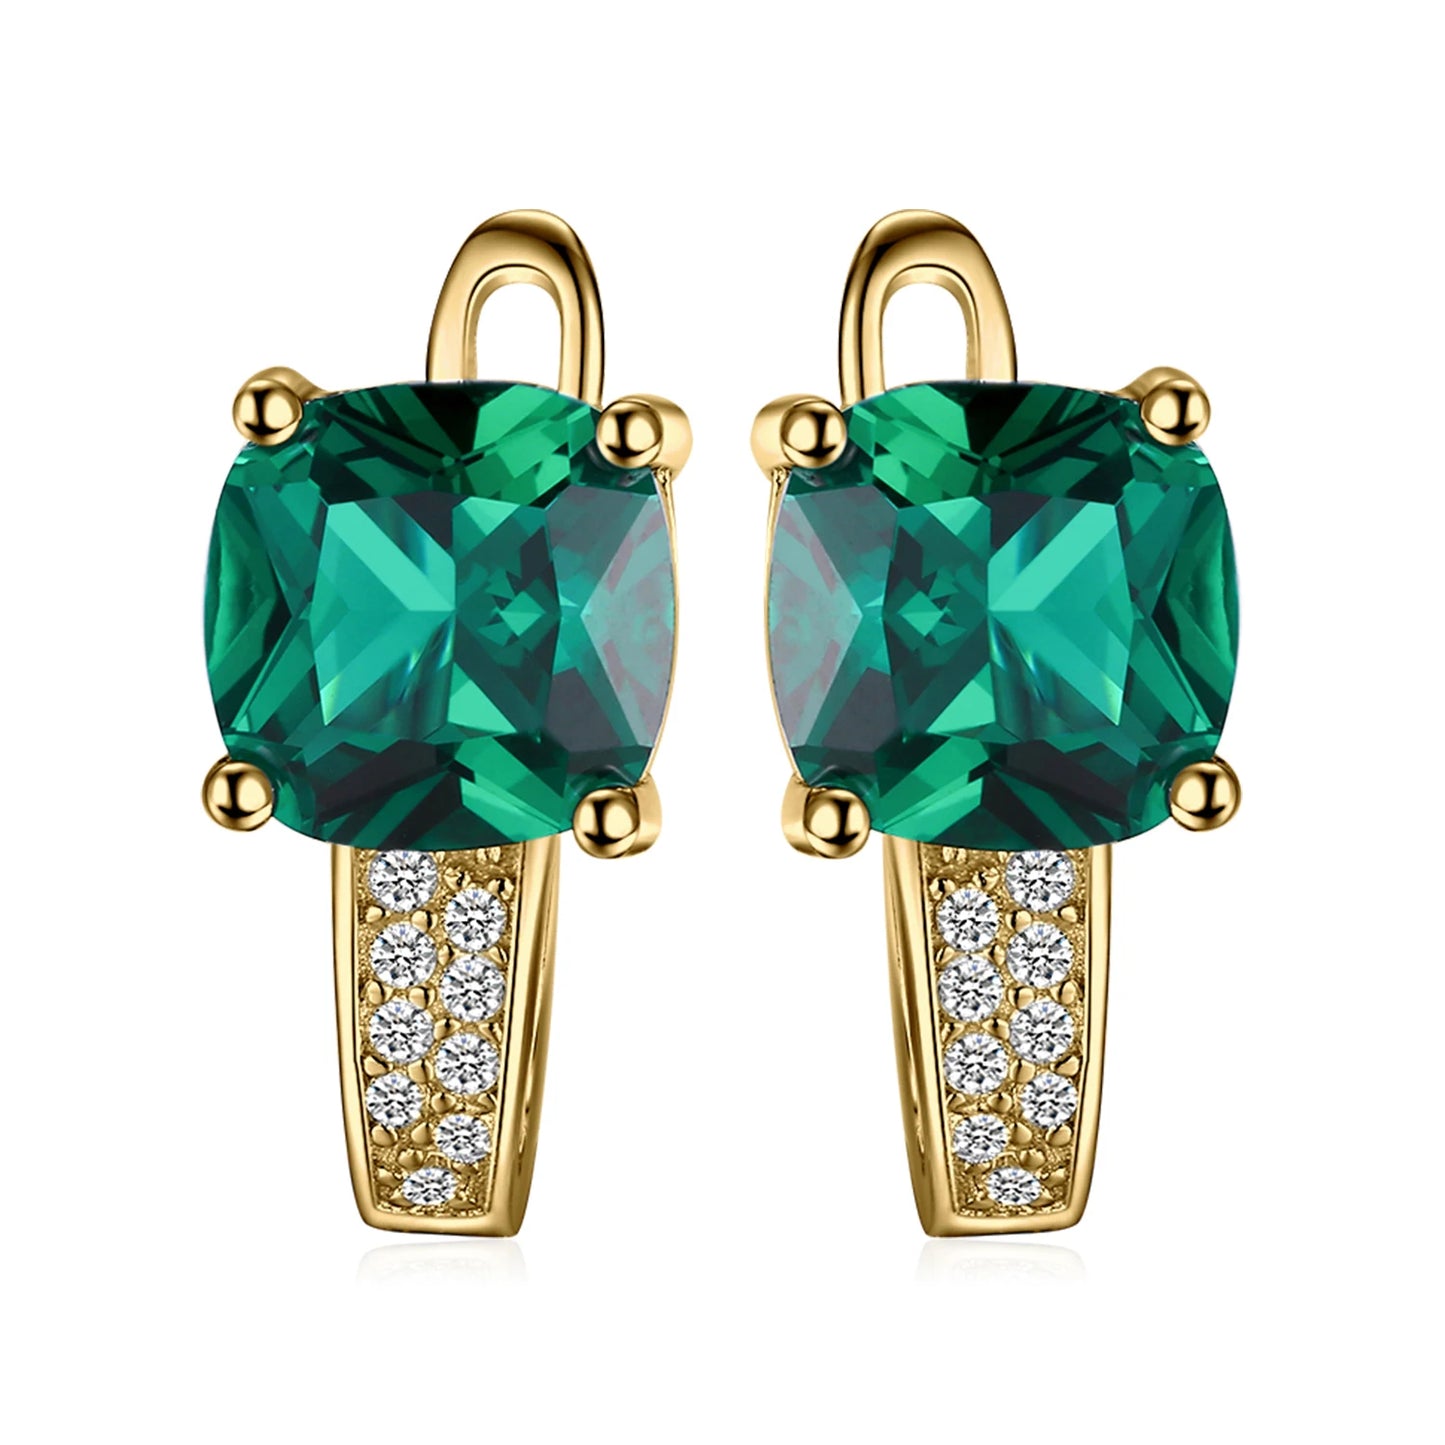 JewelryPalace Cushion Cut Simulated Emerald 925 Sterling Silver Fashion Clip Earrings for Woman Yellow Gold Rose Gold Plated Yellow Gold Plated